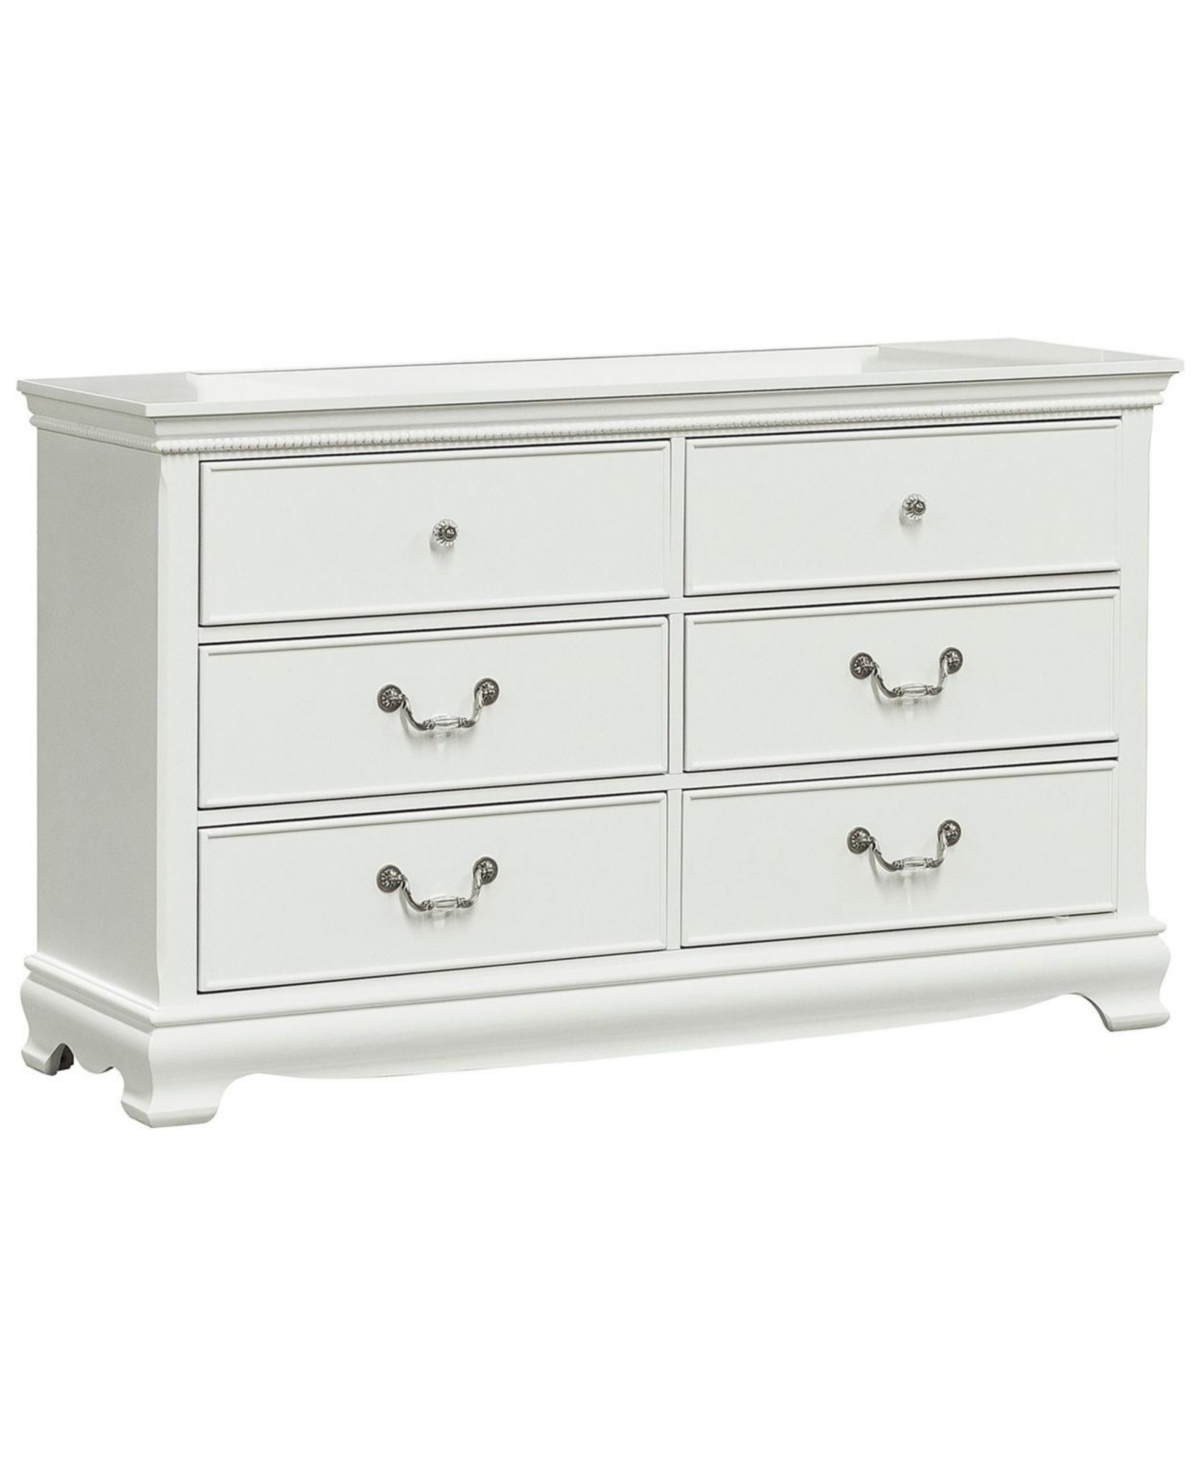 6-Drawer White Finish Traditional Dresser with Antique Handles - White